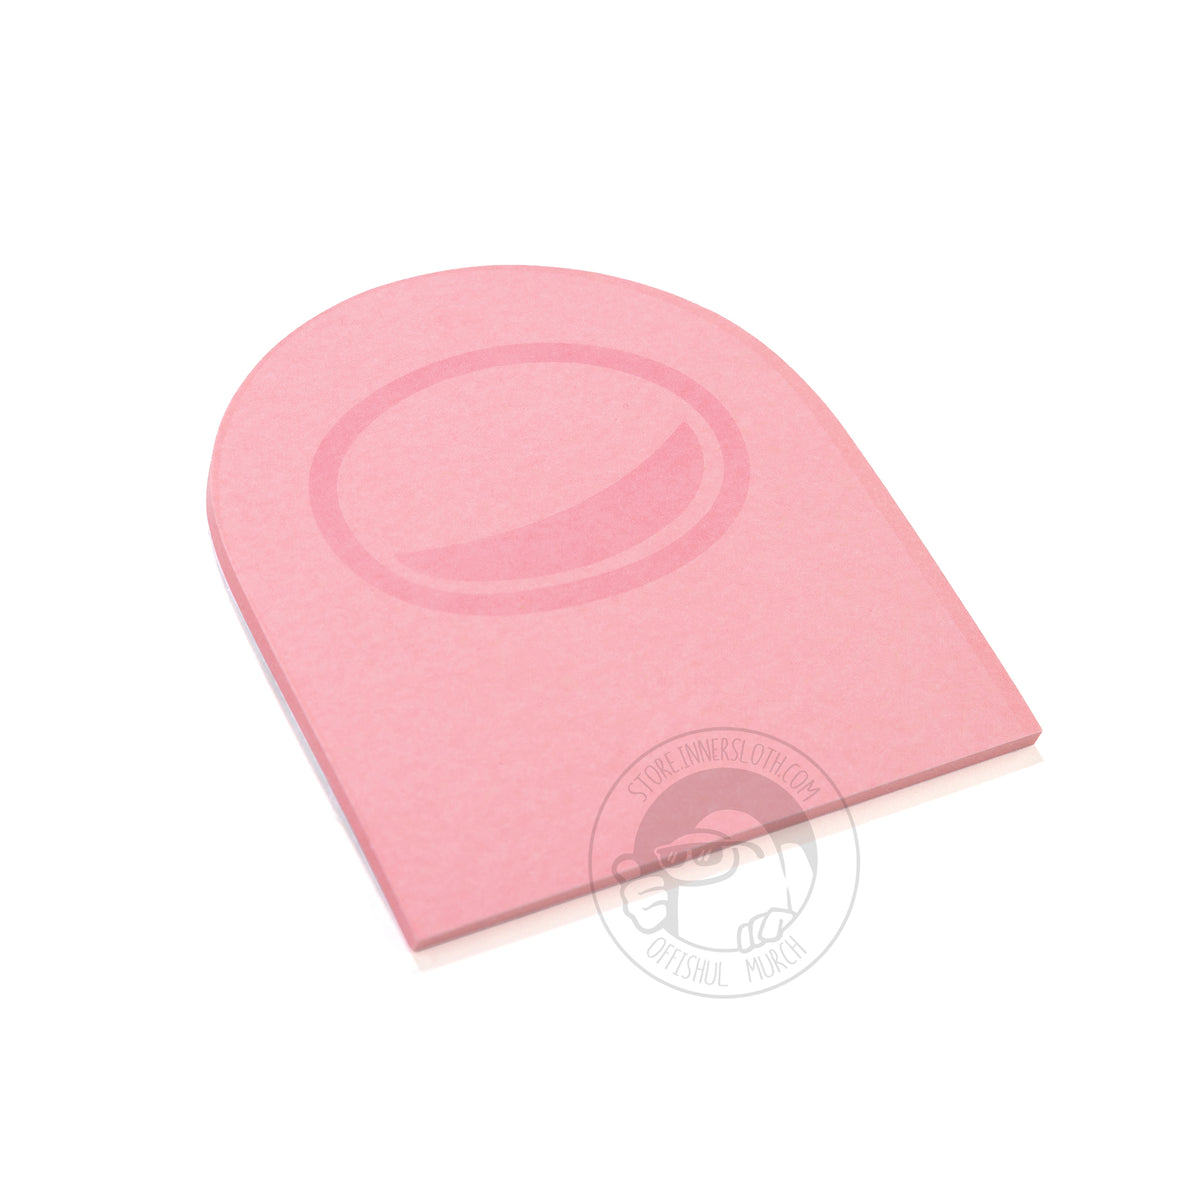 A product photo of the pink pack of Crewmate Post-It Notes placed diagonally.